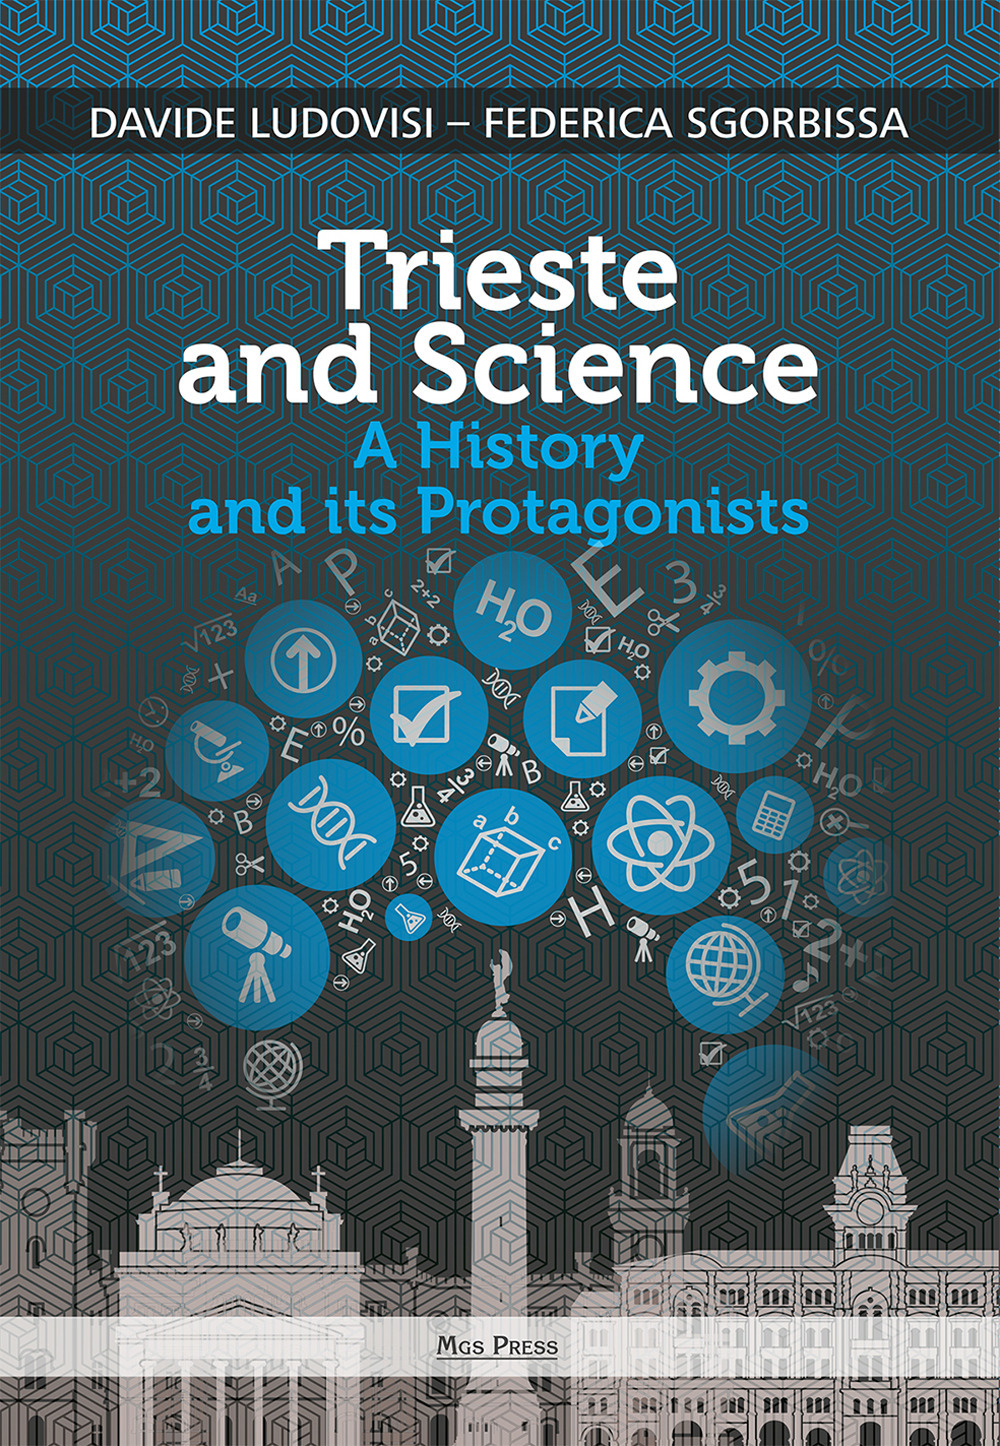 Trieste and science. A history and its protagonists